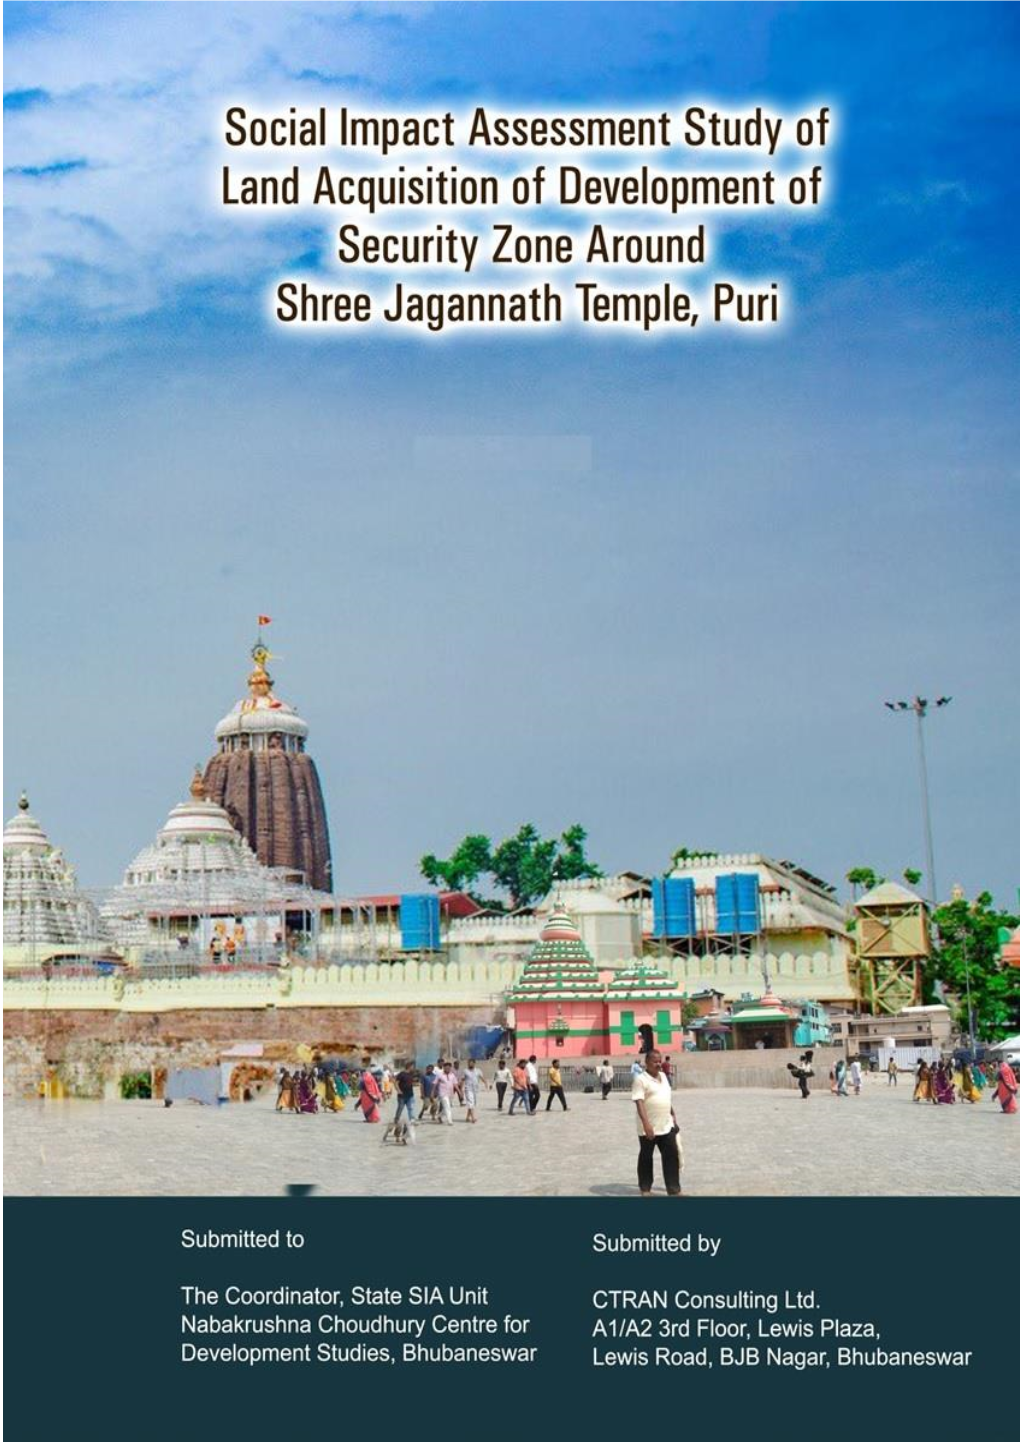 Social Impact Assessment Study of Land Acquisition of Development of Security Zone Around Shree Jagannatha Temple, Puri